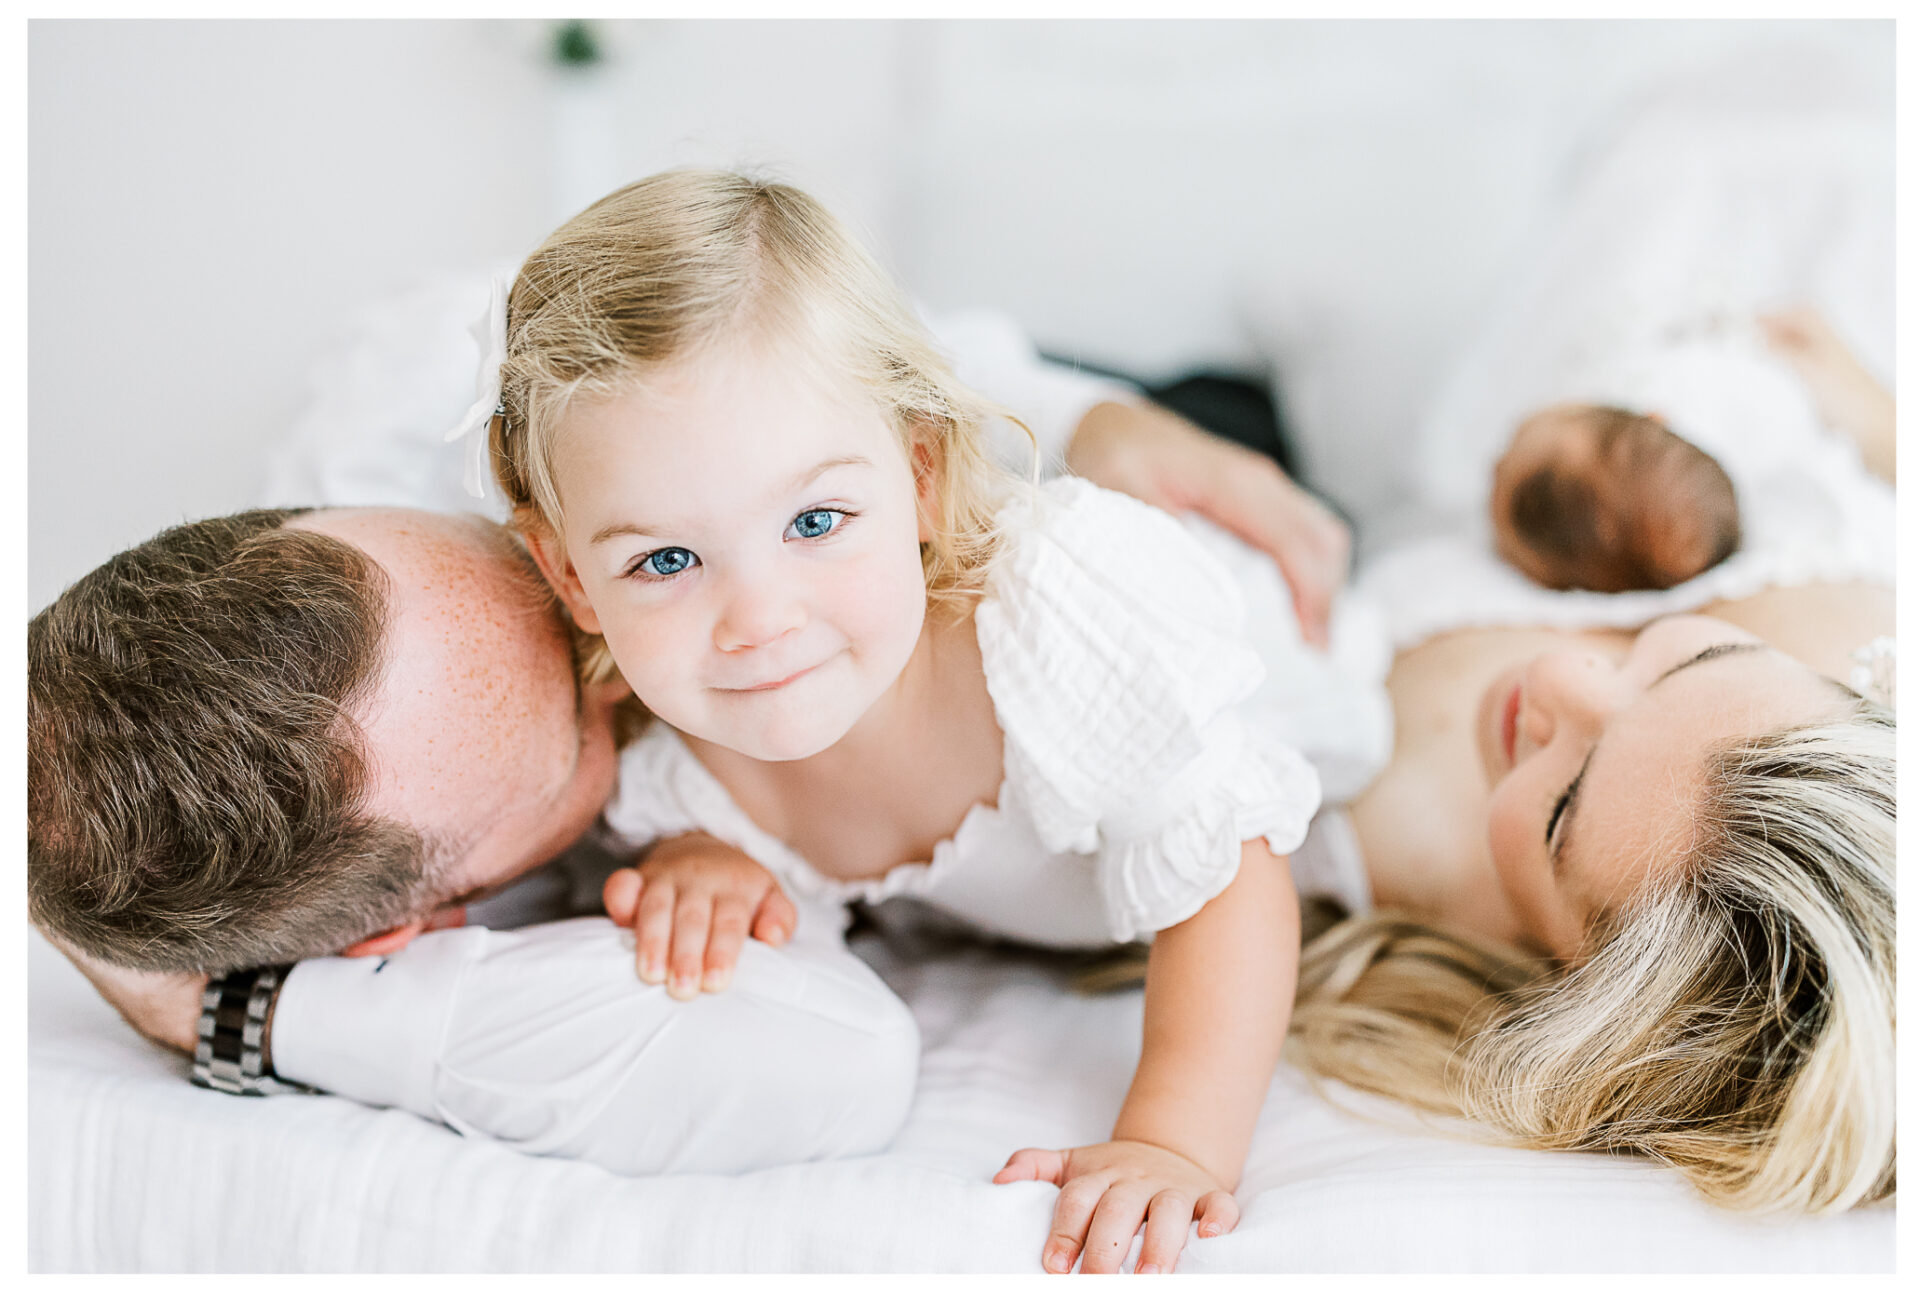 Winter Freire Photography | Dayton, Ohio Newborn Session | Family snuggling together on a bed